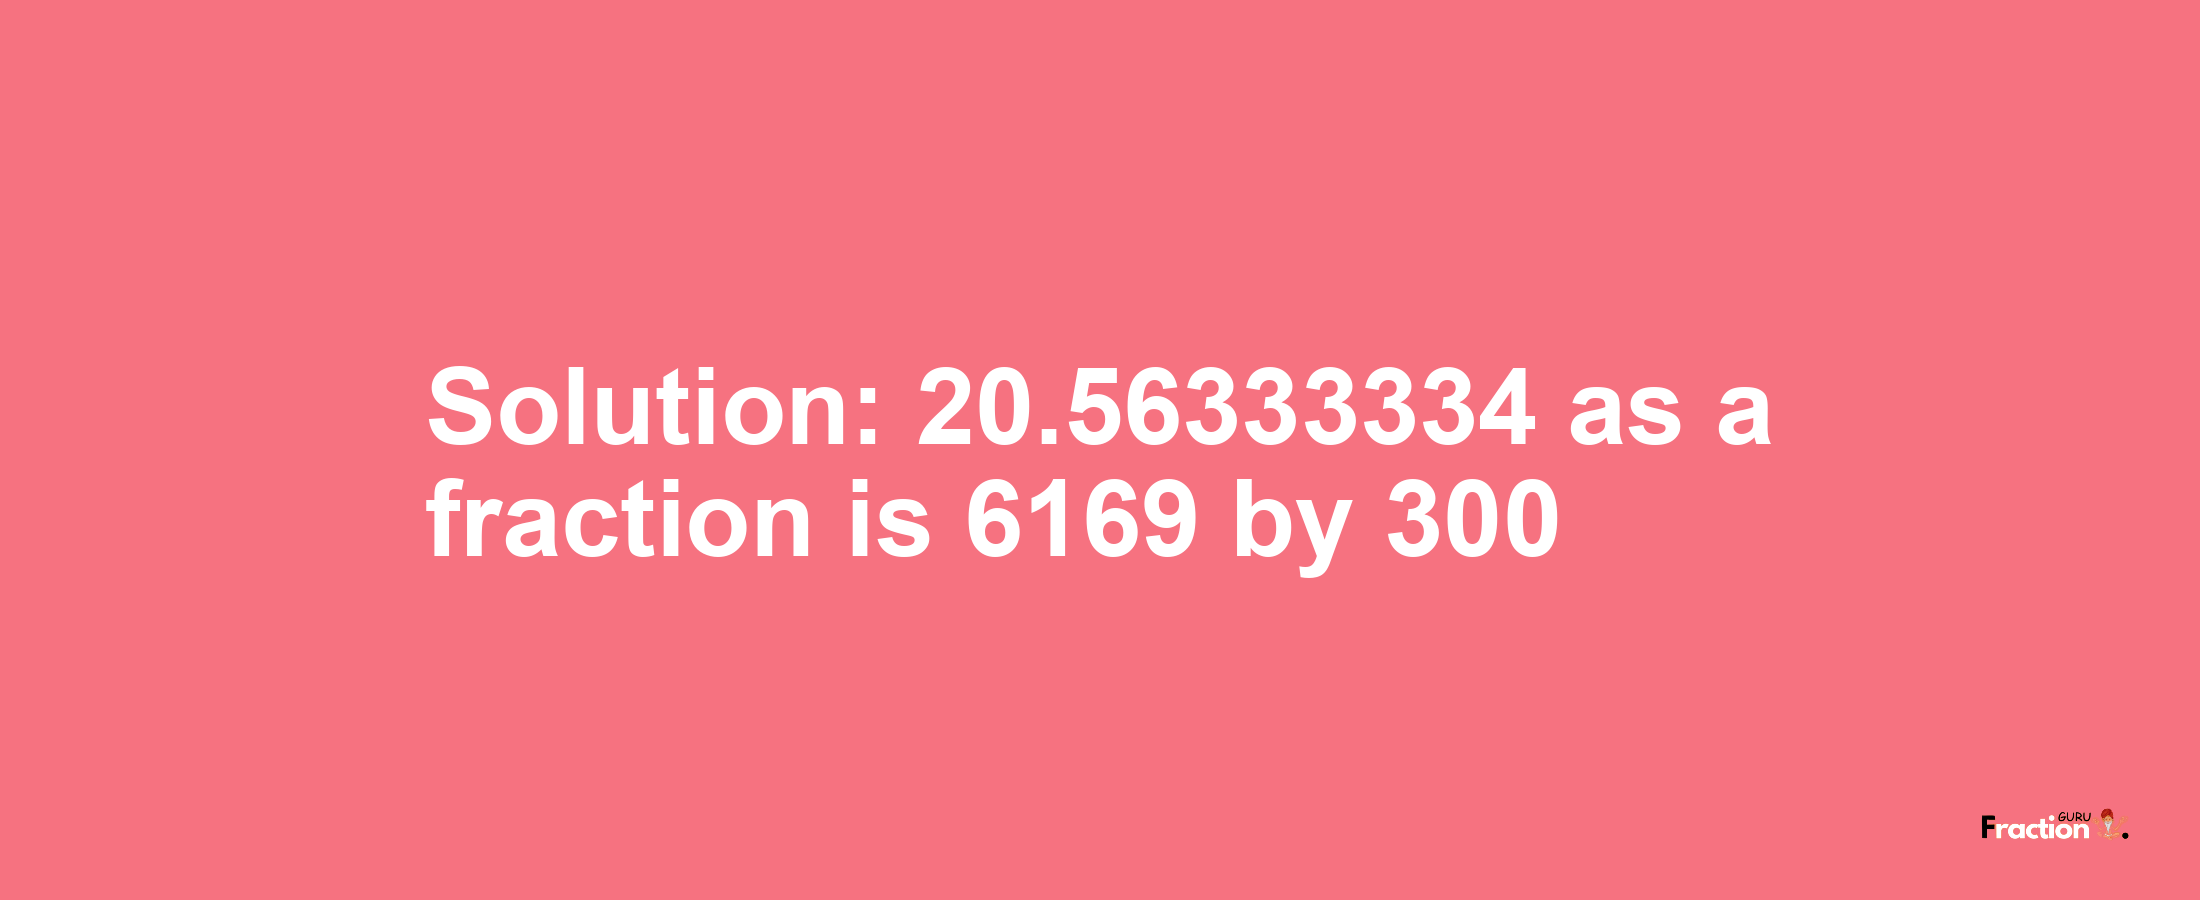 Solution:20.56333334 as a fraction is 6169/300